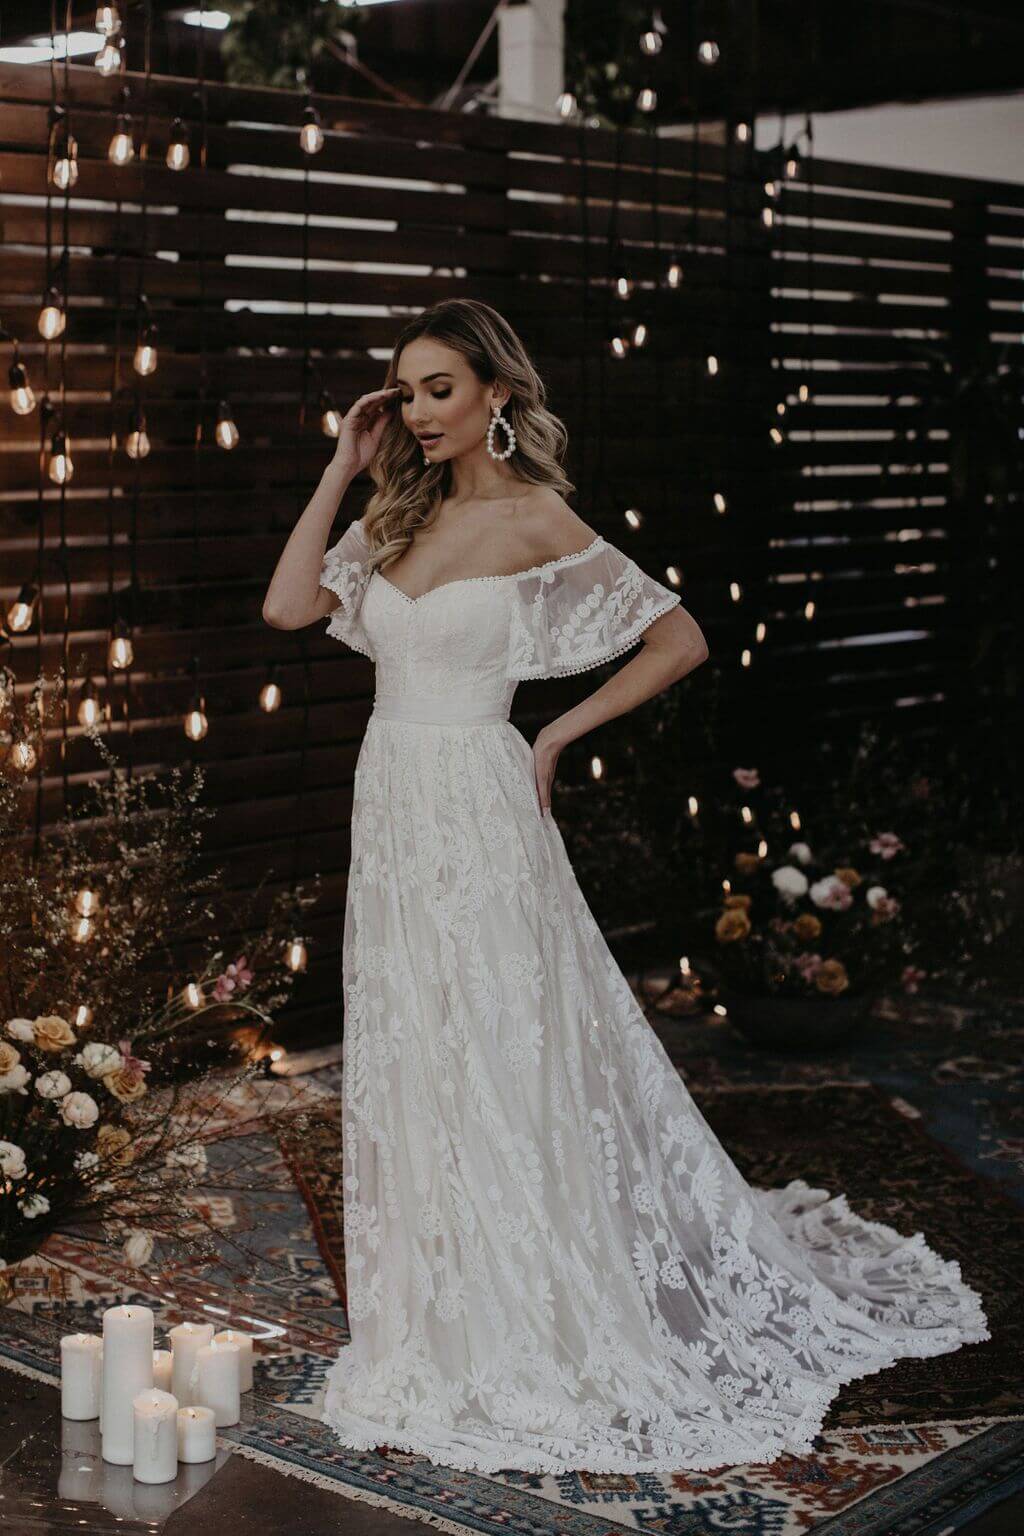 Dream Wedding Dress – Find The Dress Of Your Dreams